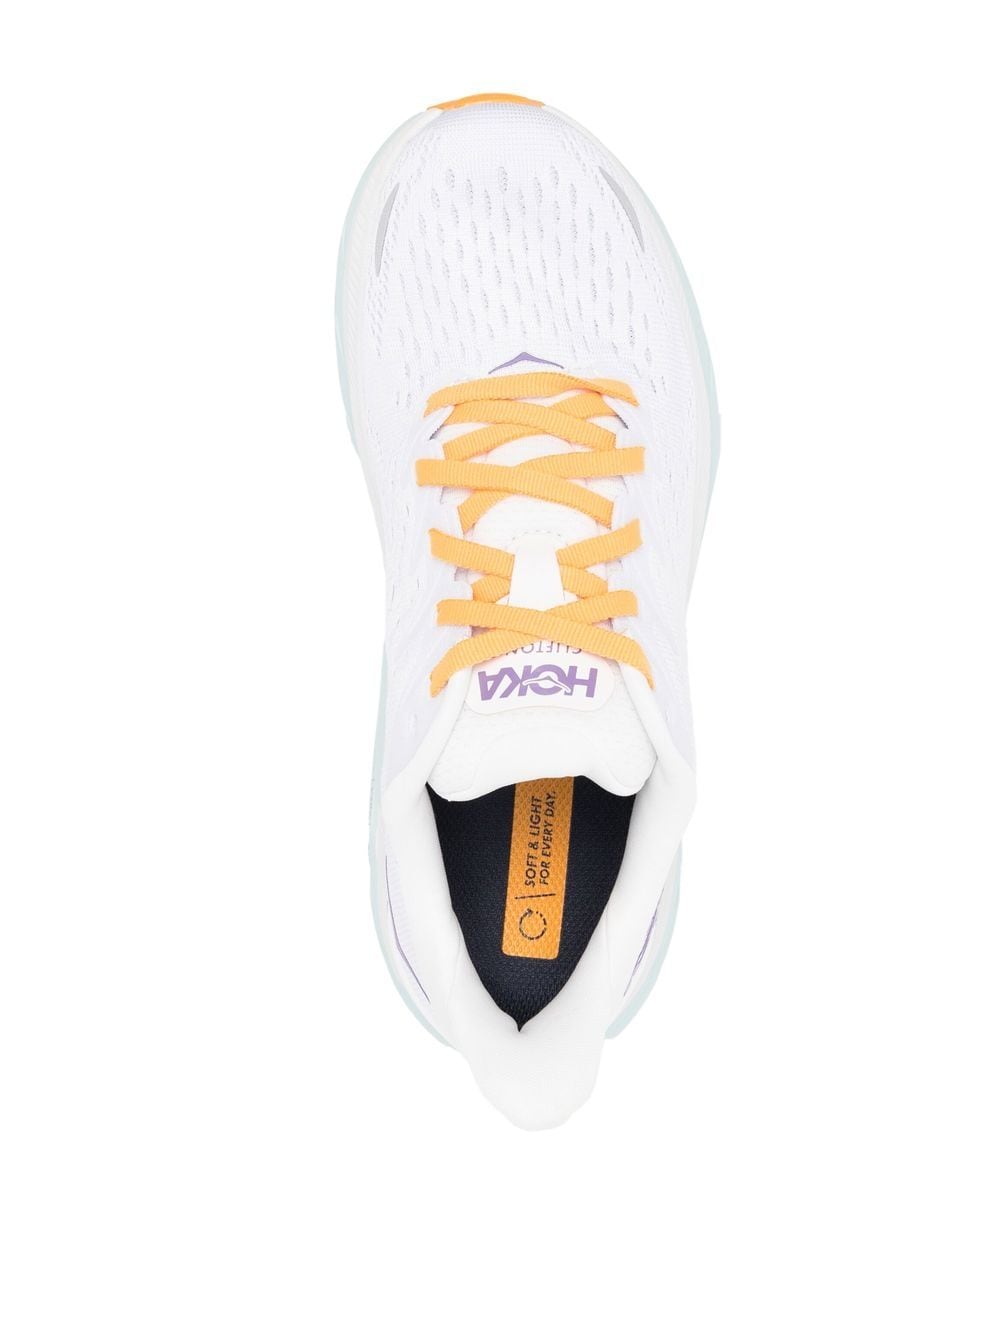 White/lilac Clifton 8 running sneakers